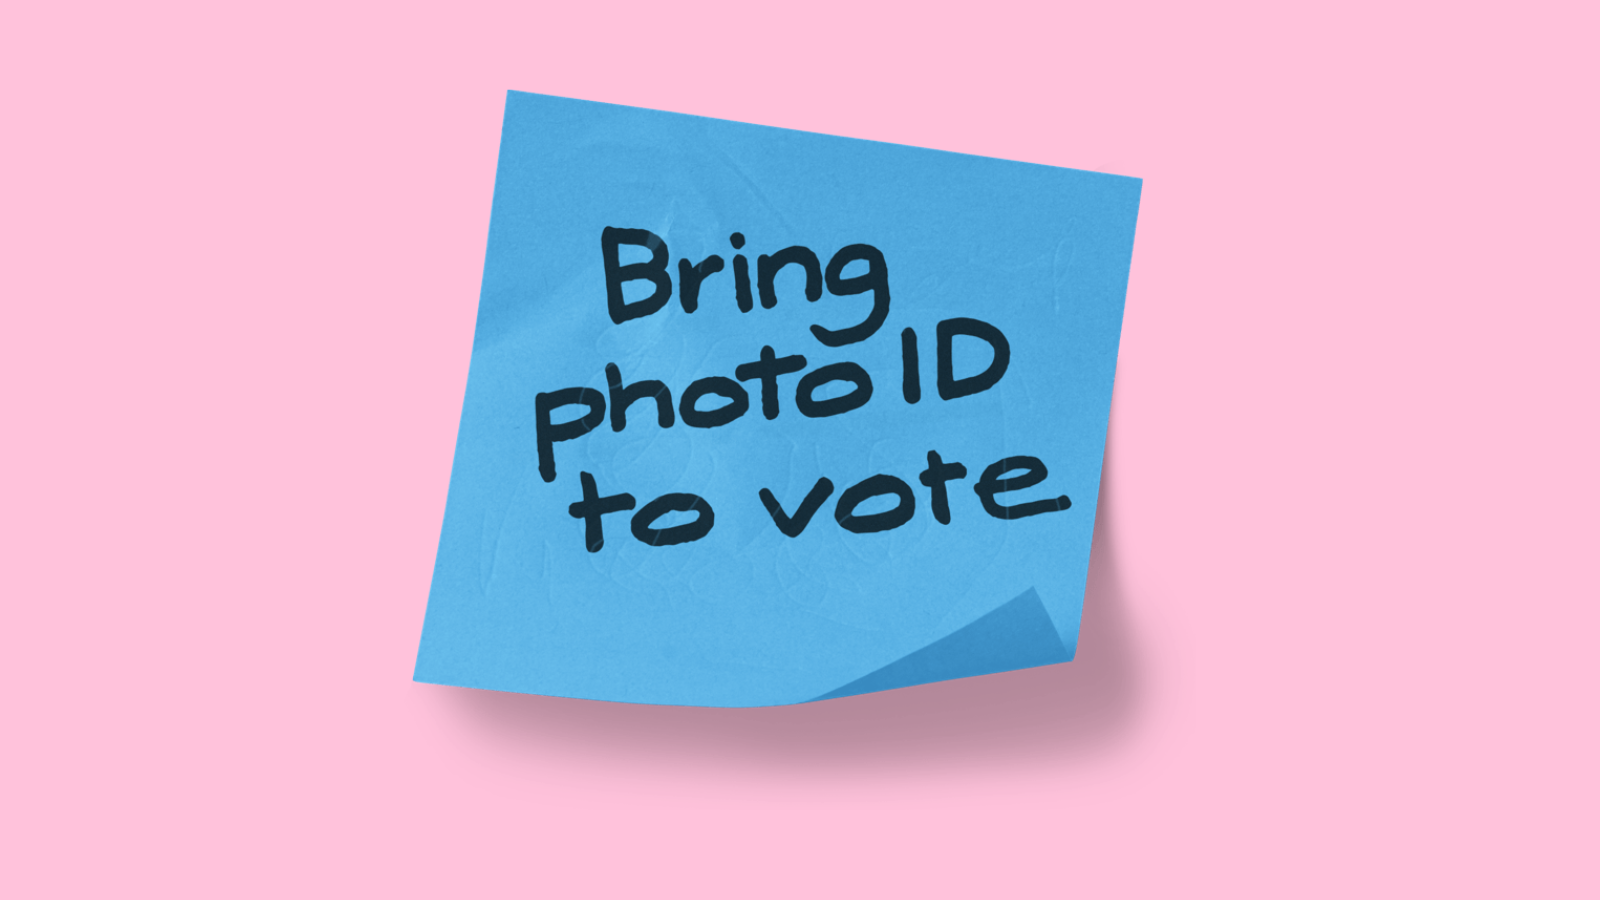 A blue post it note on a pink background. Text reads "Bring photo ID to vote"